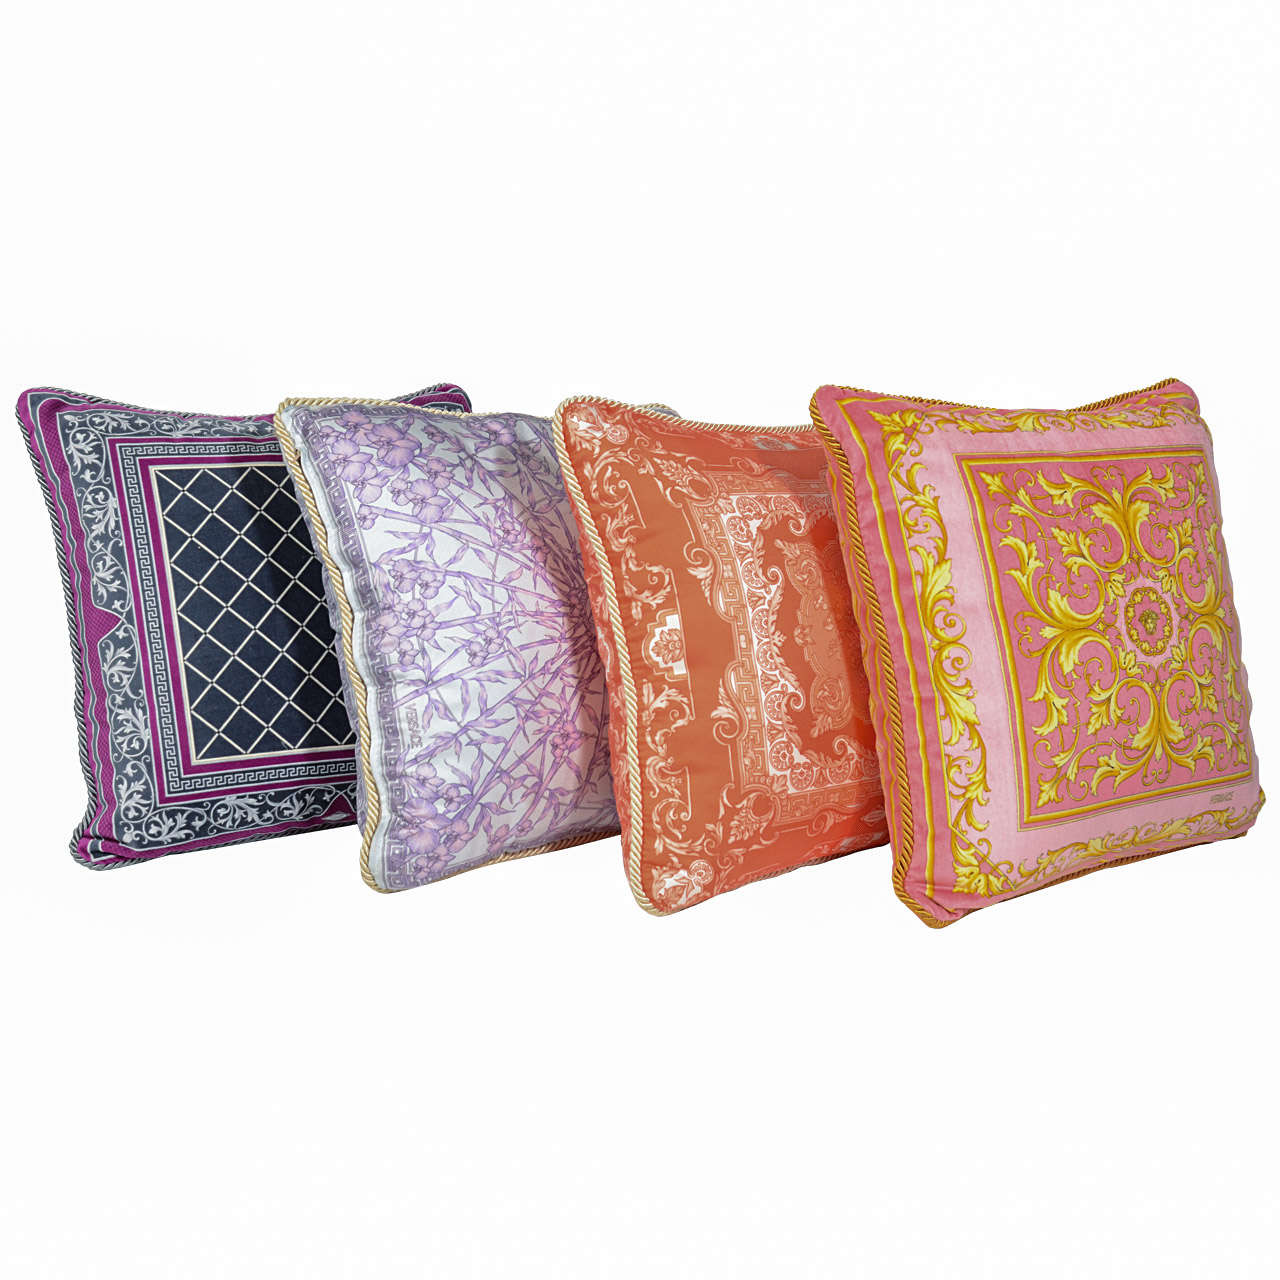 Set of 4 Vintage Versace Throw Pillows with Scarf Print Designs